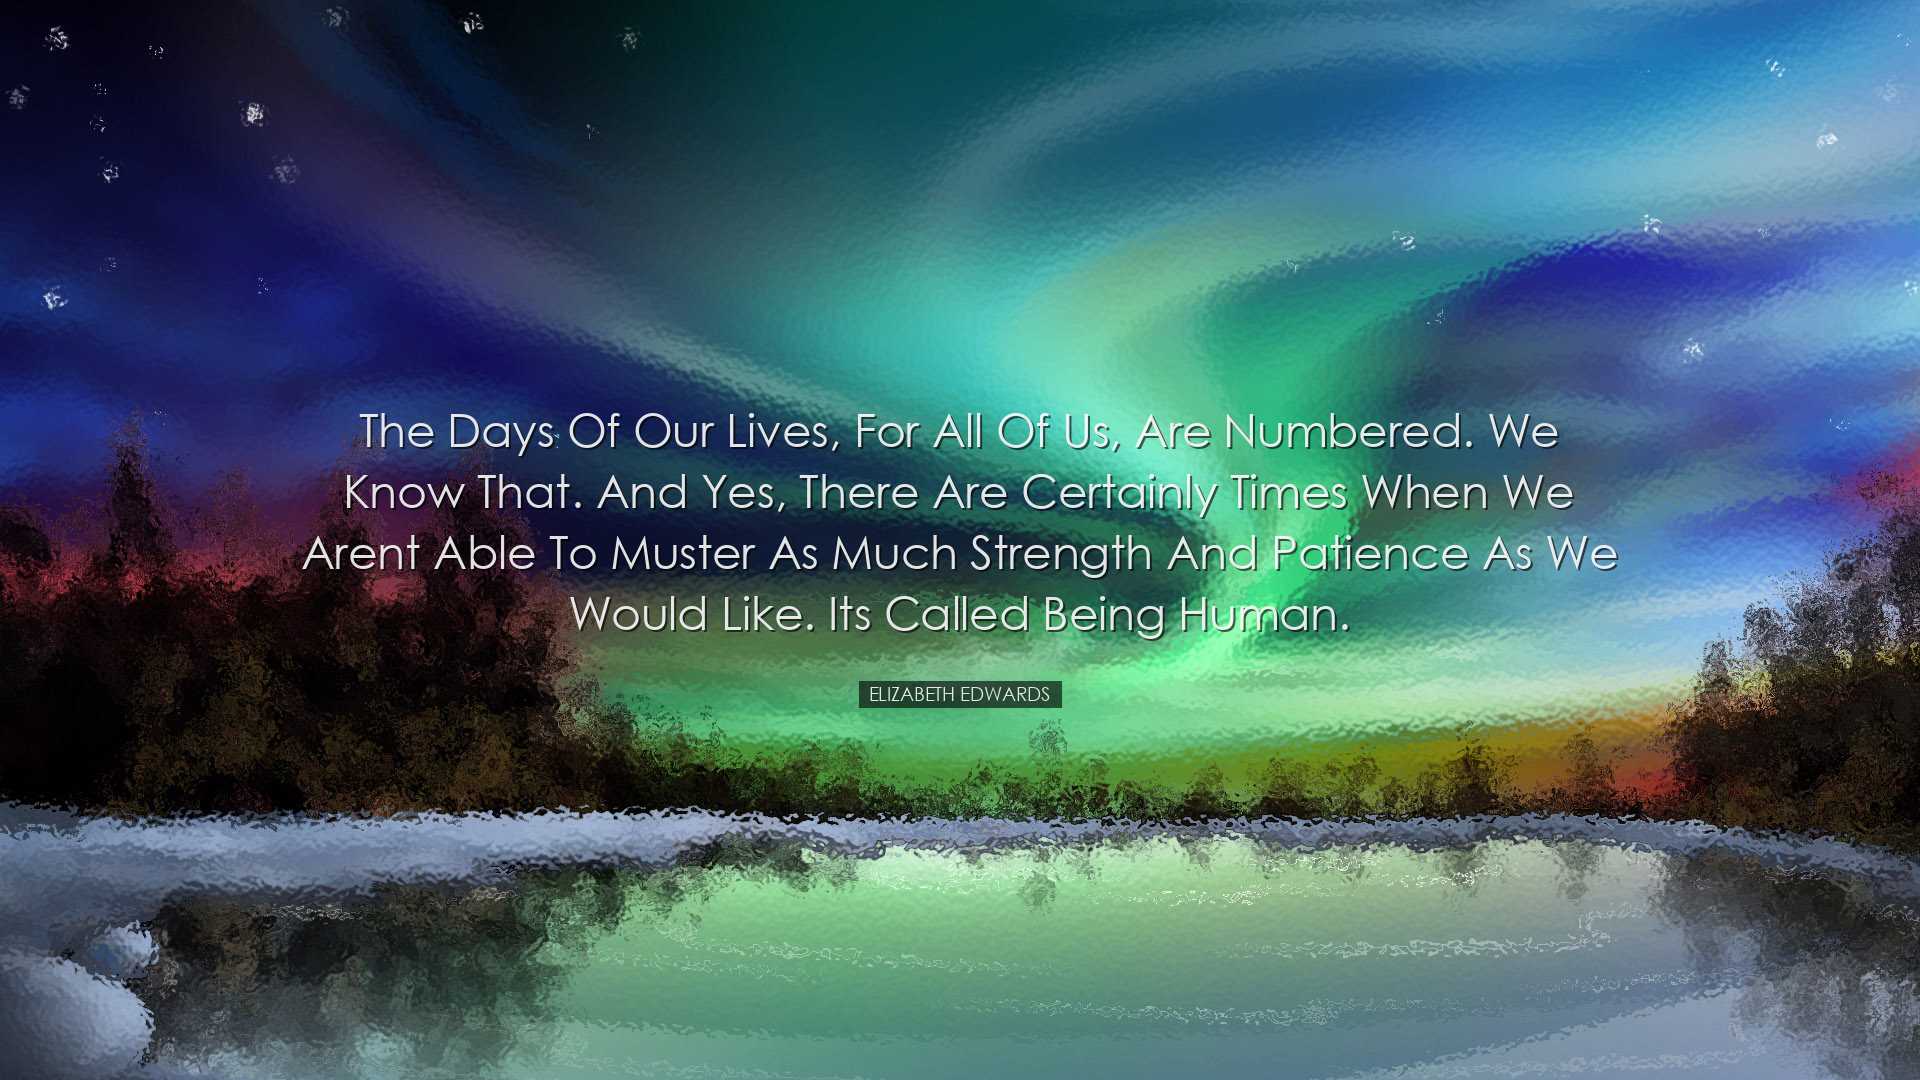 The days of our lives, for all of us, are numbered. We know that.